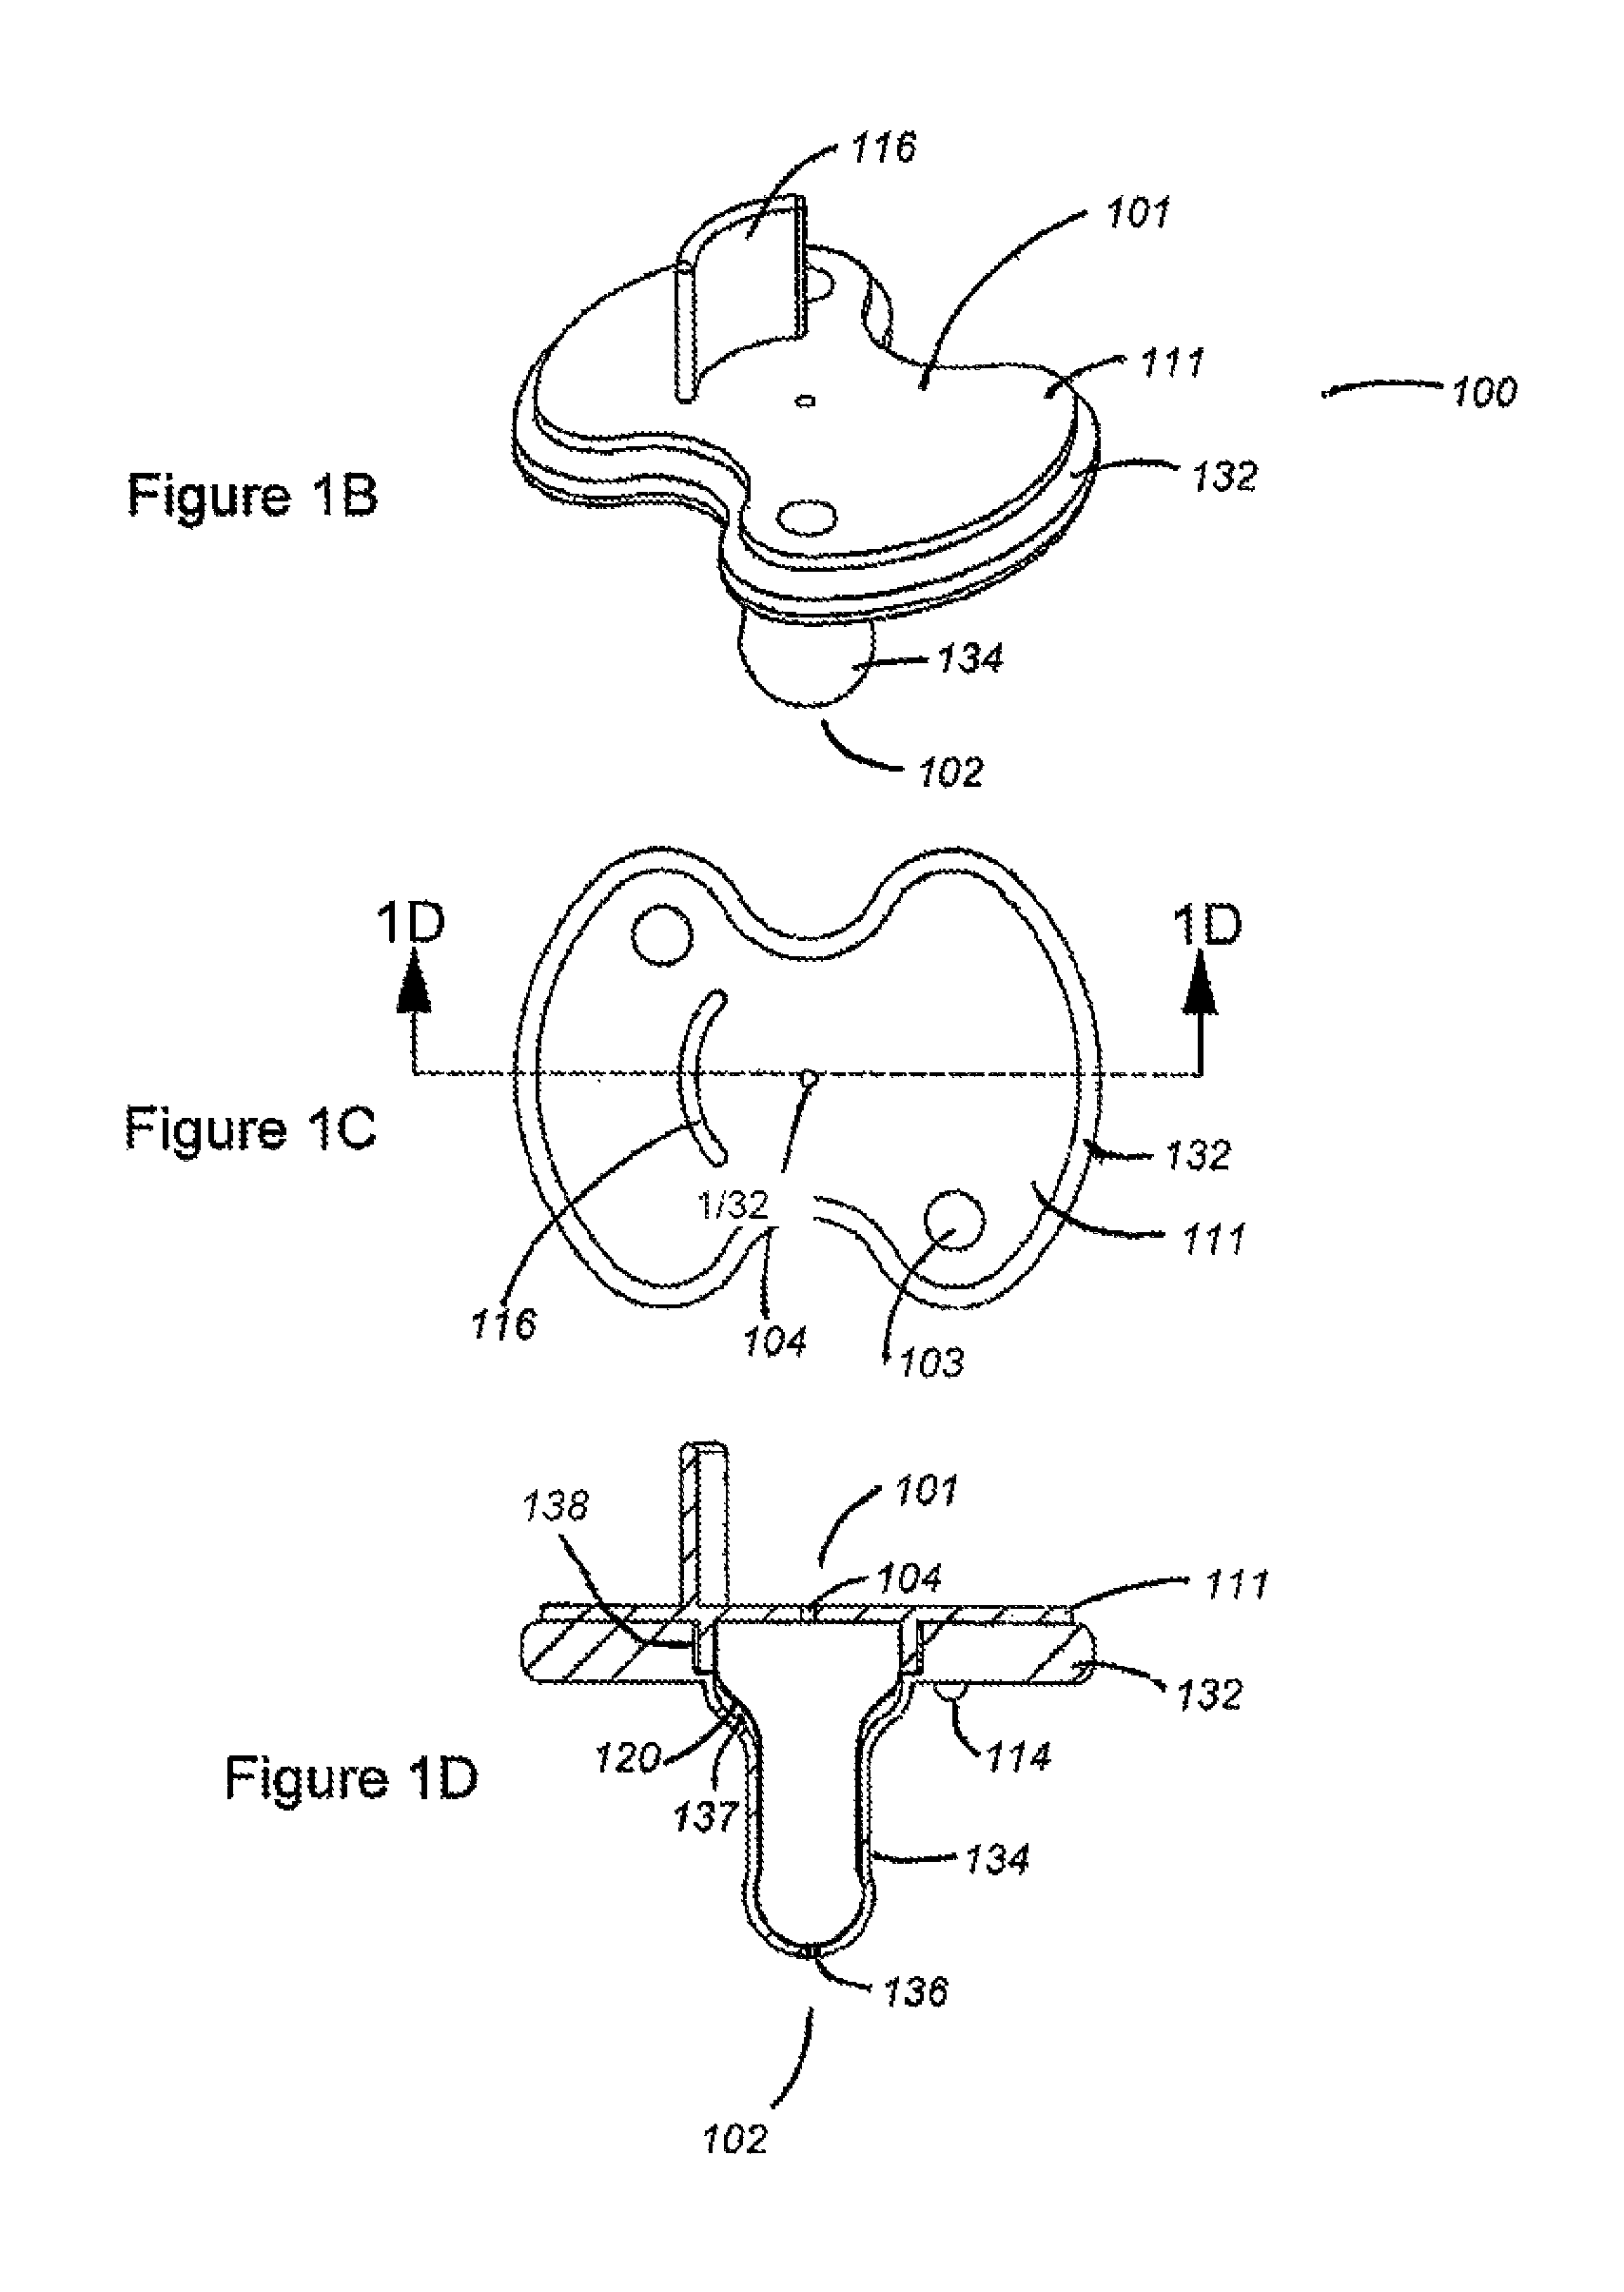 Apparatus and methods for oral administration of fluids and medical instrumentation